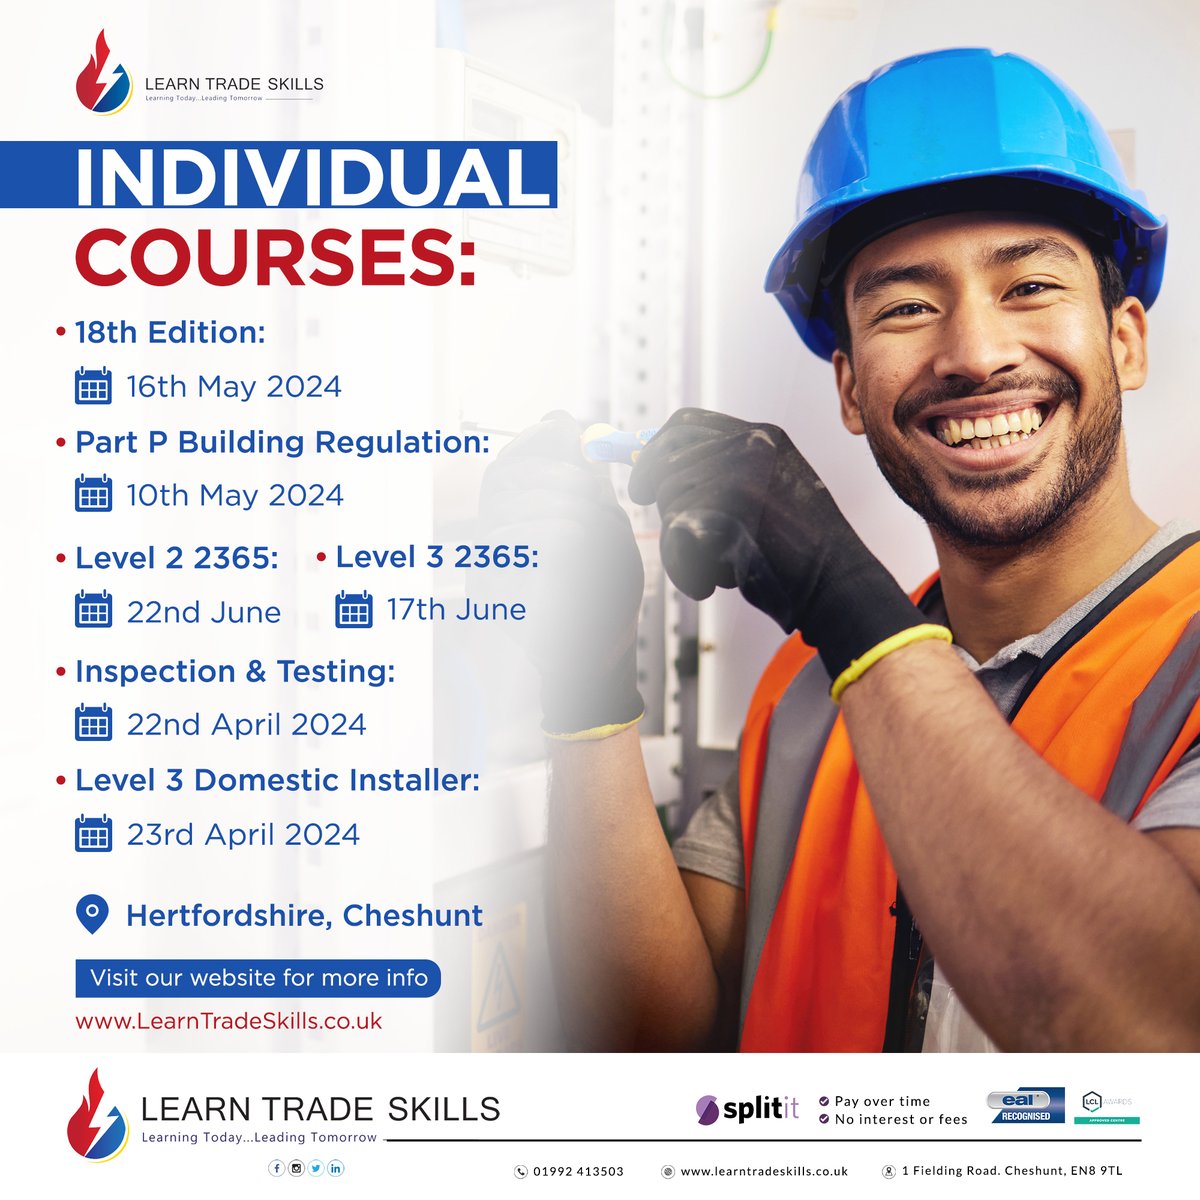 Check out our upcoming electrical courses! ⚡Book through the link in our bio or by calling us on 01992 413 503 

#electrician #explorepage #tutorial #trades #ukelectricians #electriciancourses #learningprograms #skillstraining